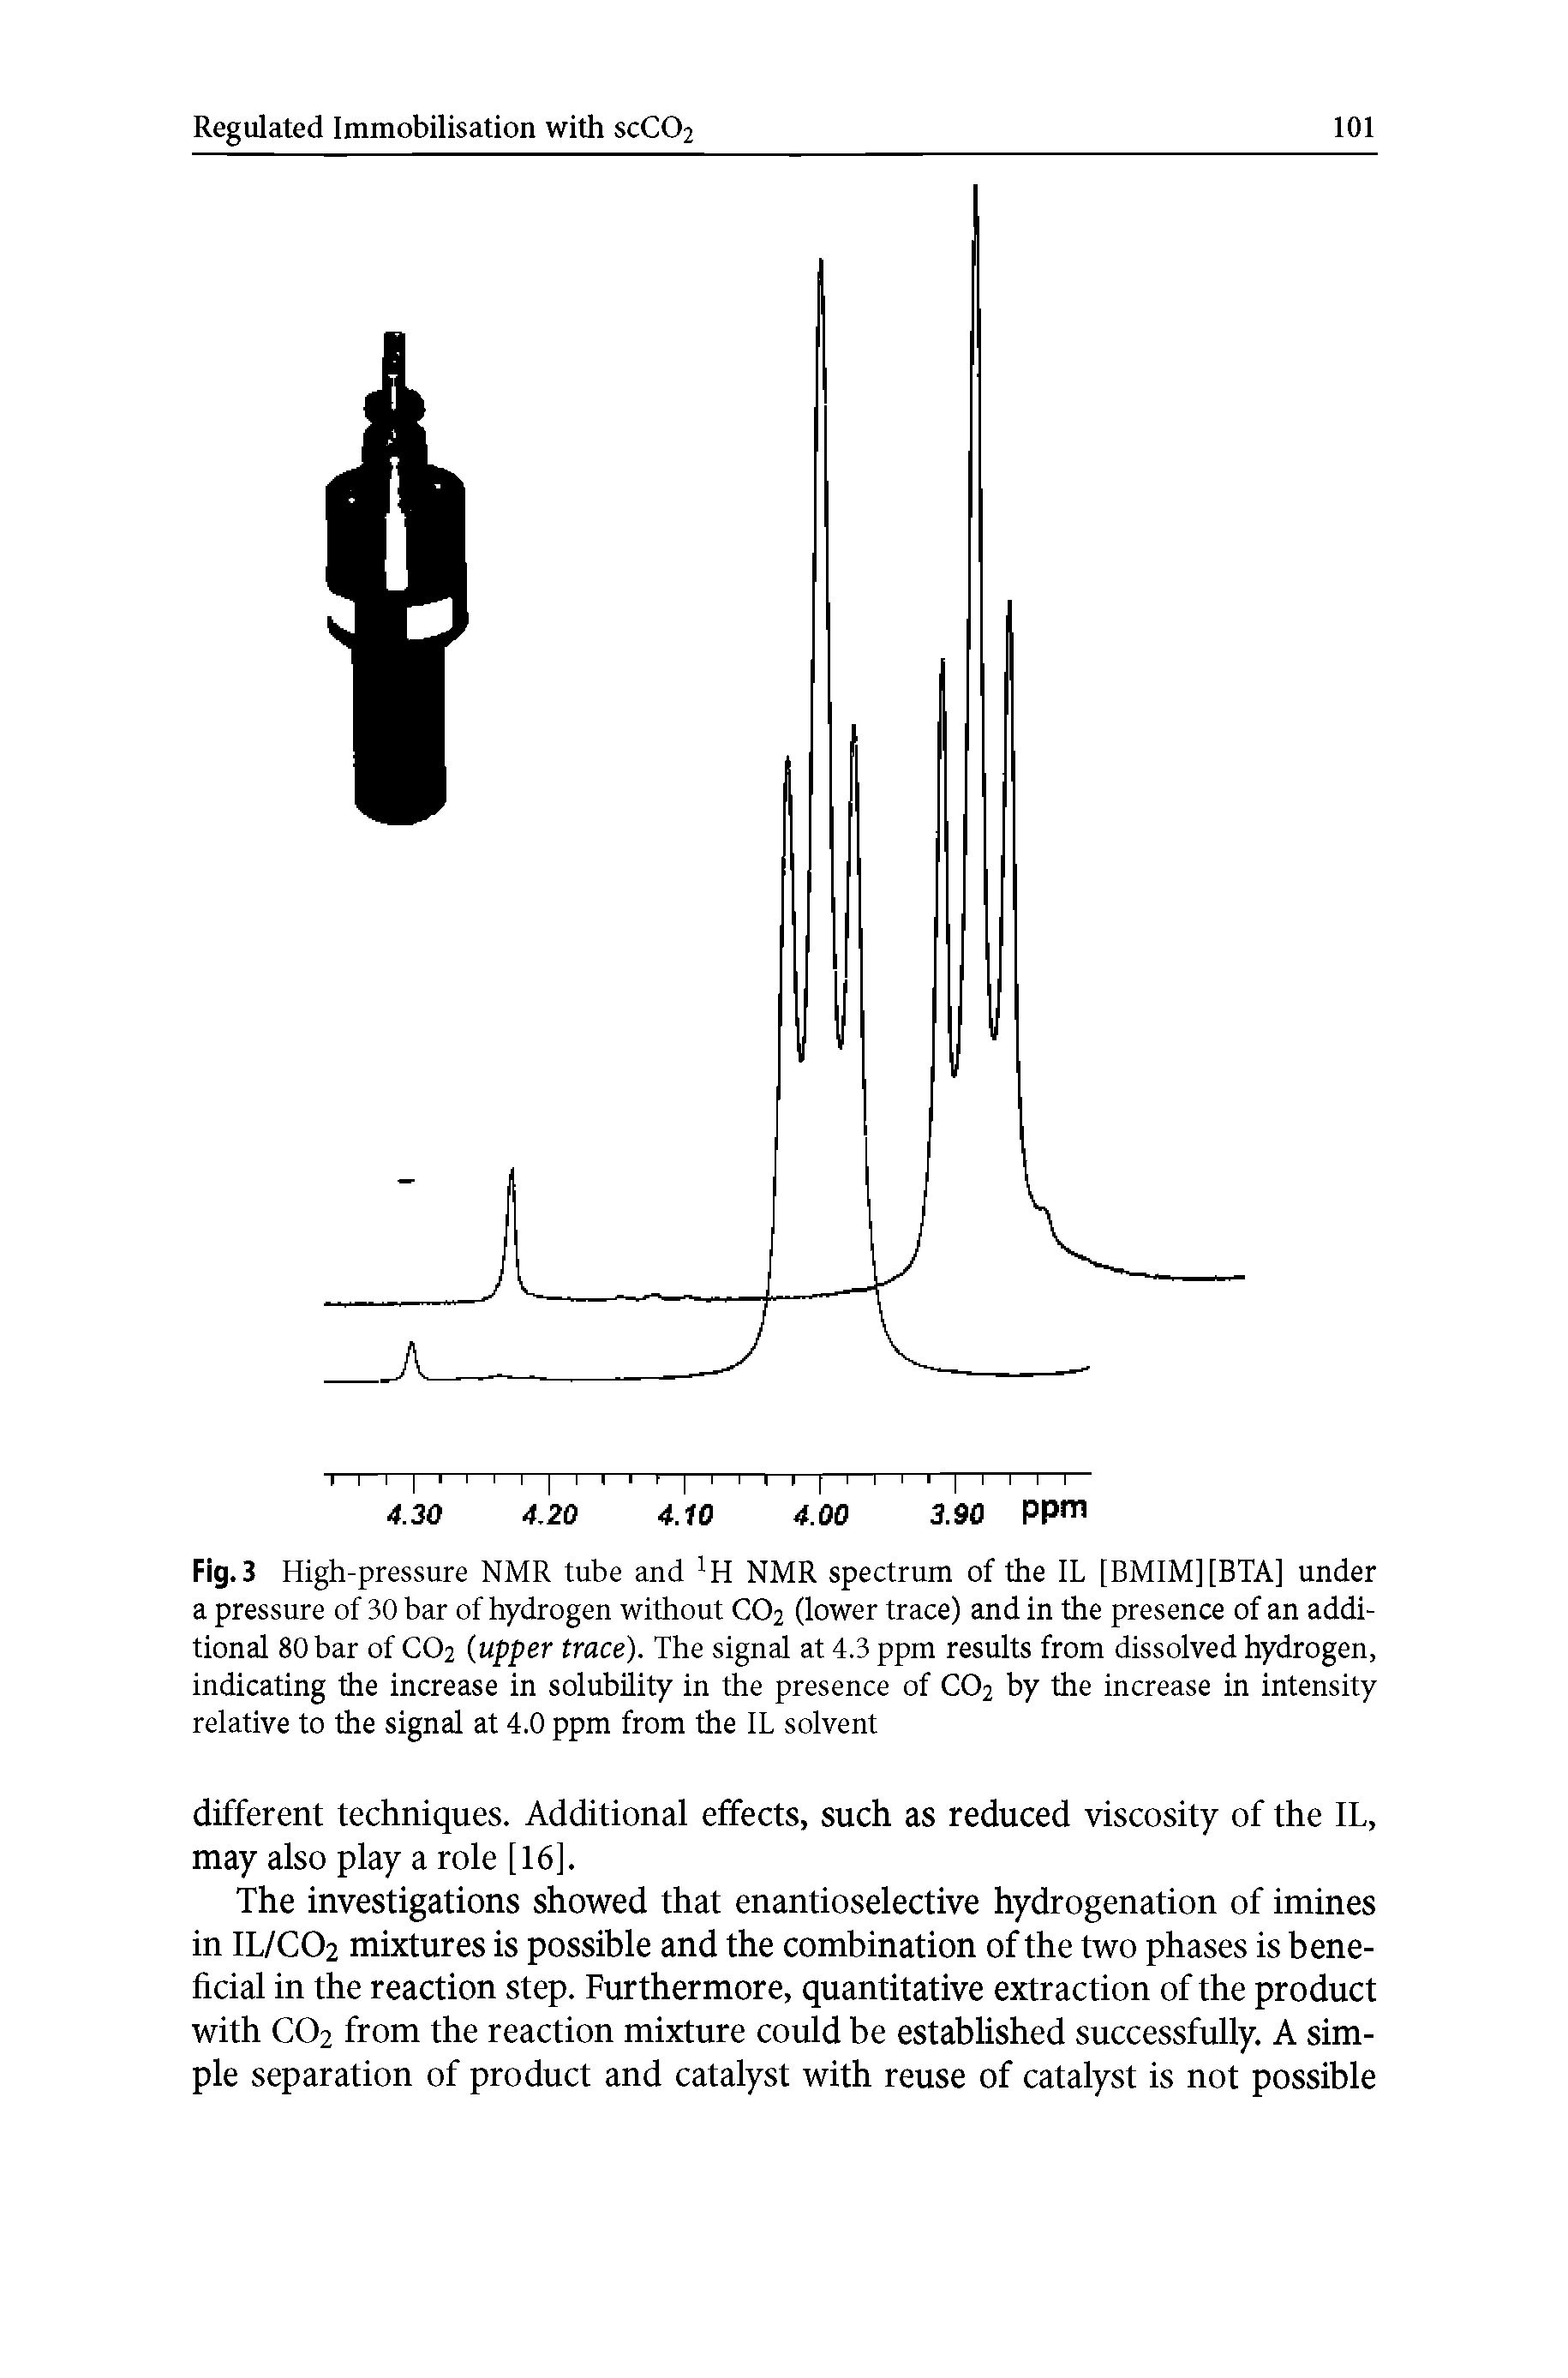 Fig.3 High-pressure NMR tube and NMR spectrum of the IL [BMIM][BTA] under a pressure of 30 bar of hydrogen without CO2 (lower trace) and in the presence of an additional 80 bar of CO2 (upper trace). The signal at 4.3 ppm results from dissolved hydrogen, indicating the increase in solubility in the presence of CO2 by the increase in intensity relative to the signal at 4.0 ppm from the IL solvent...